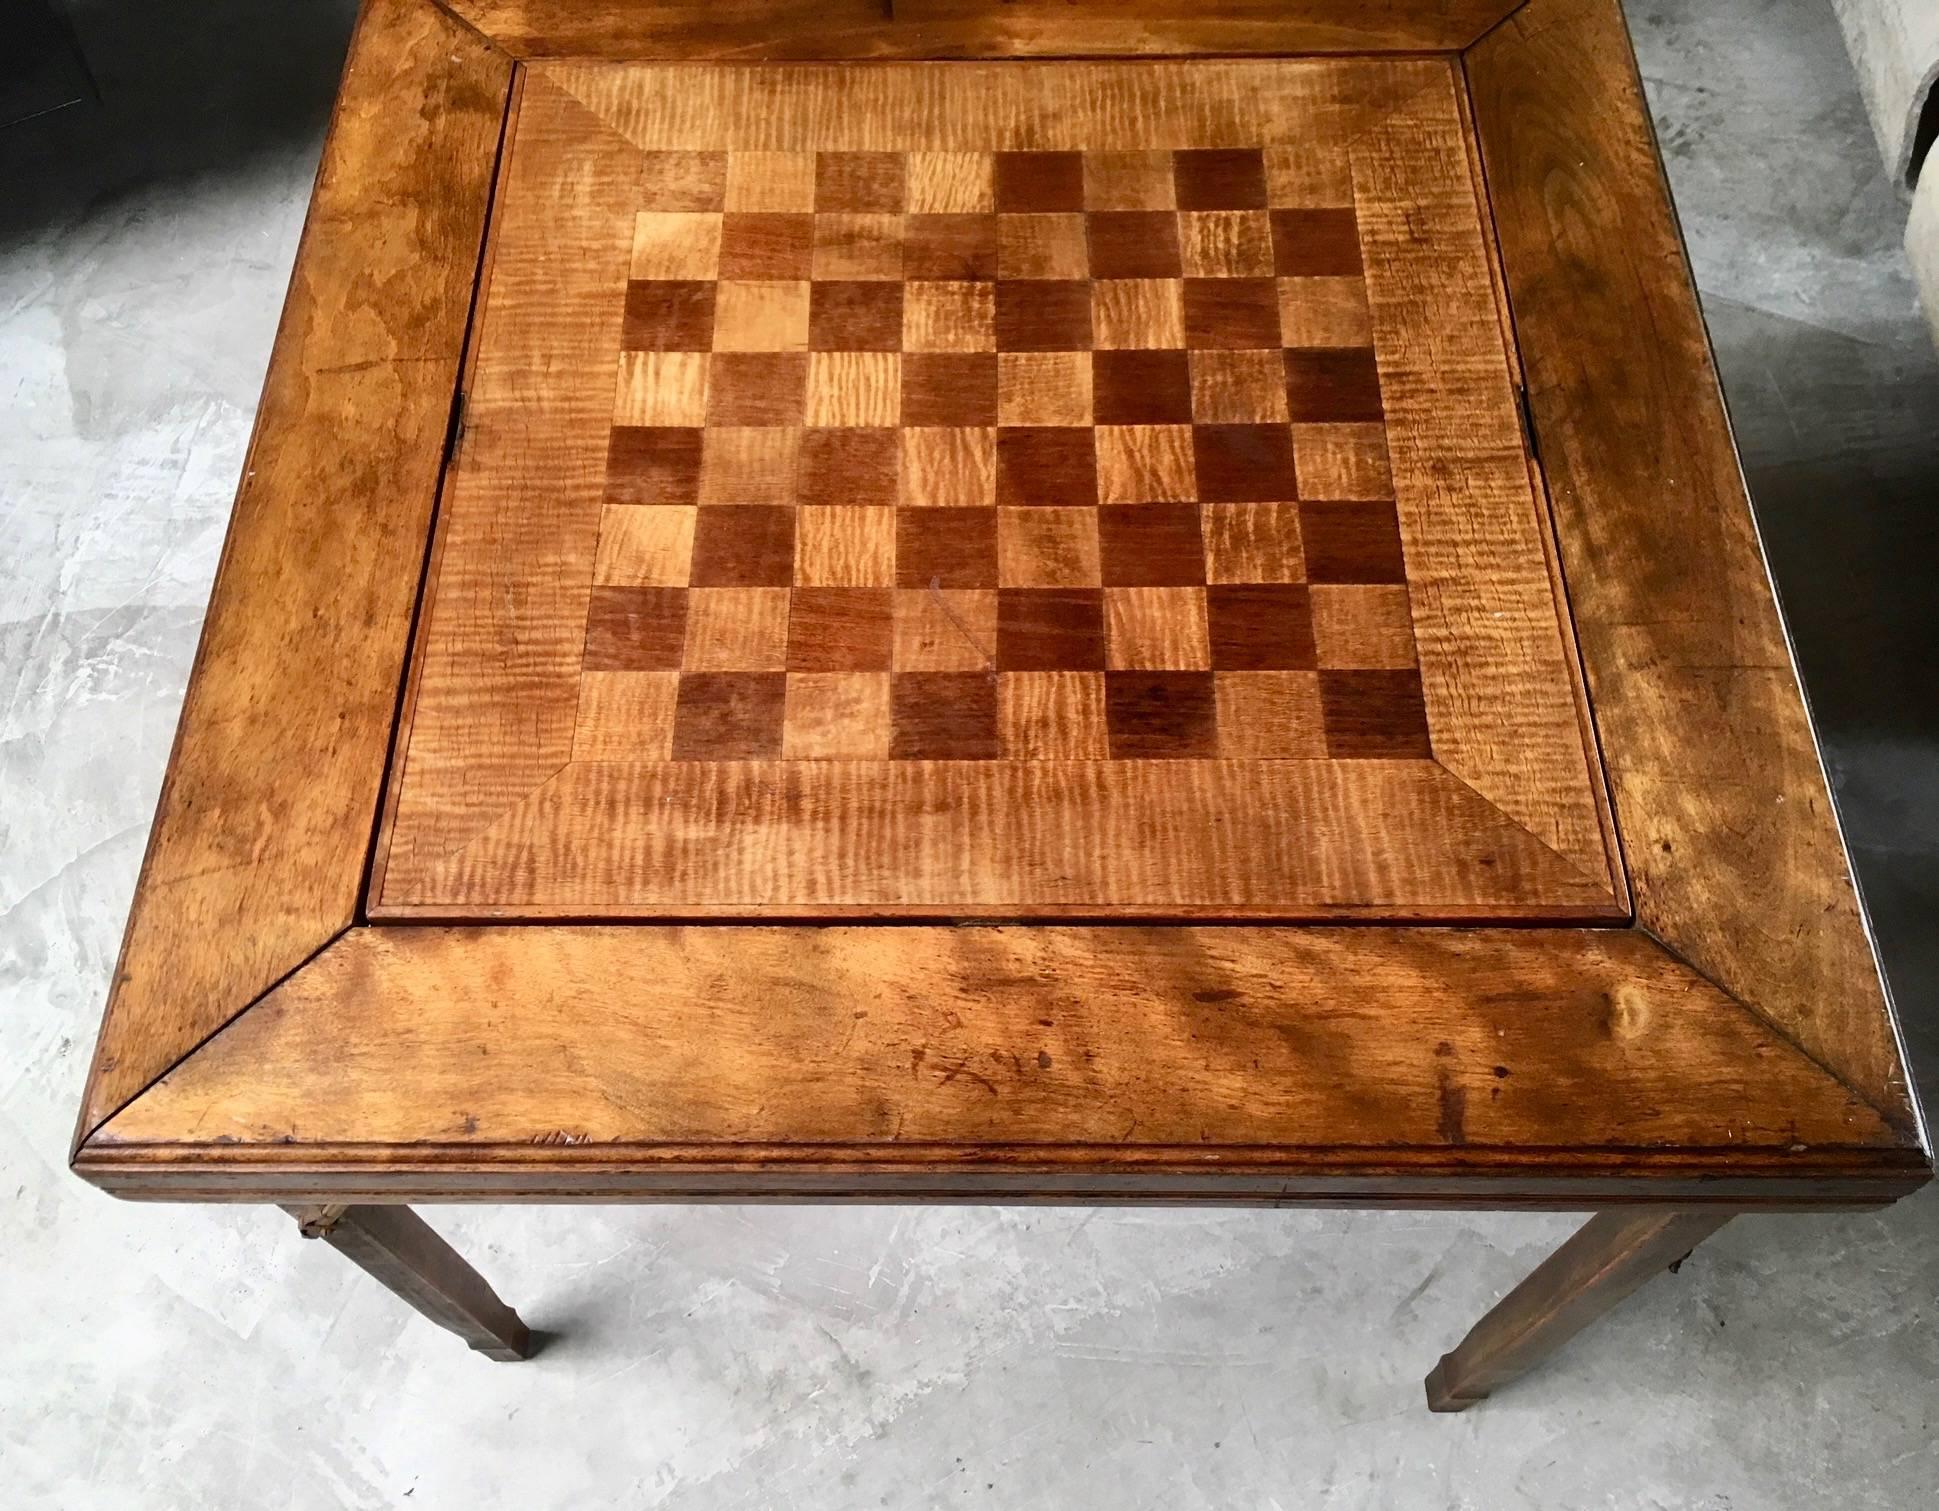 Great vintage game table with flip-top board. Super interesting flip mechanism. Cork backgammon board on one side, and wood chess board on the flip side. Great for cards, backgammon, chess. Legs fold in with metal hinges for storage. Great vintage